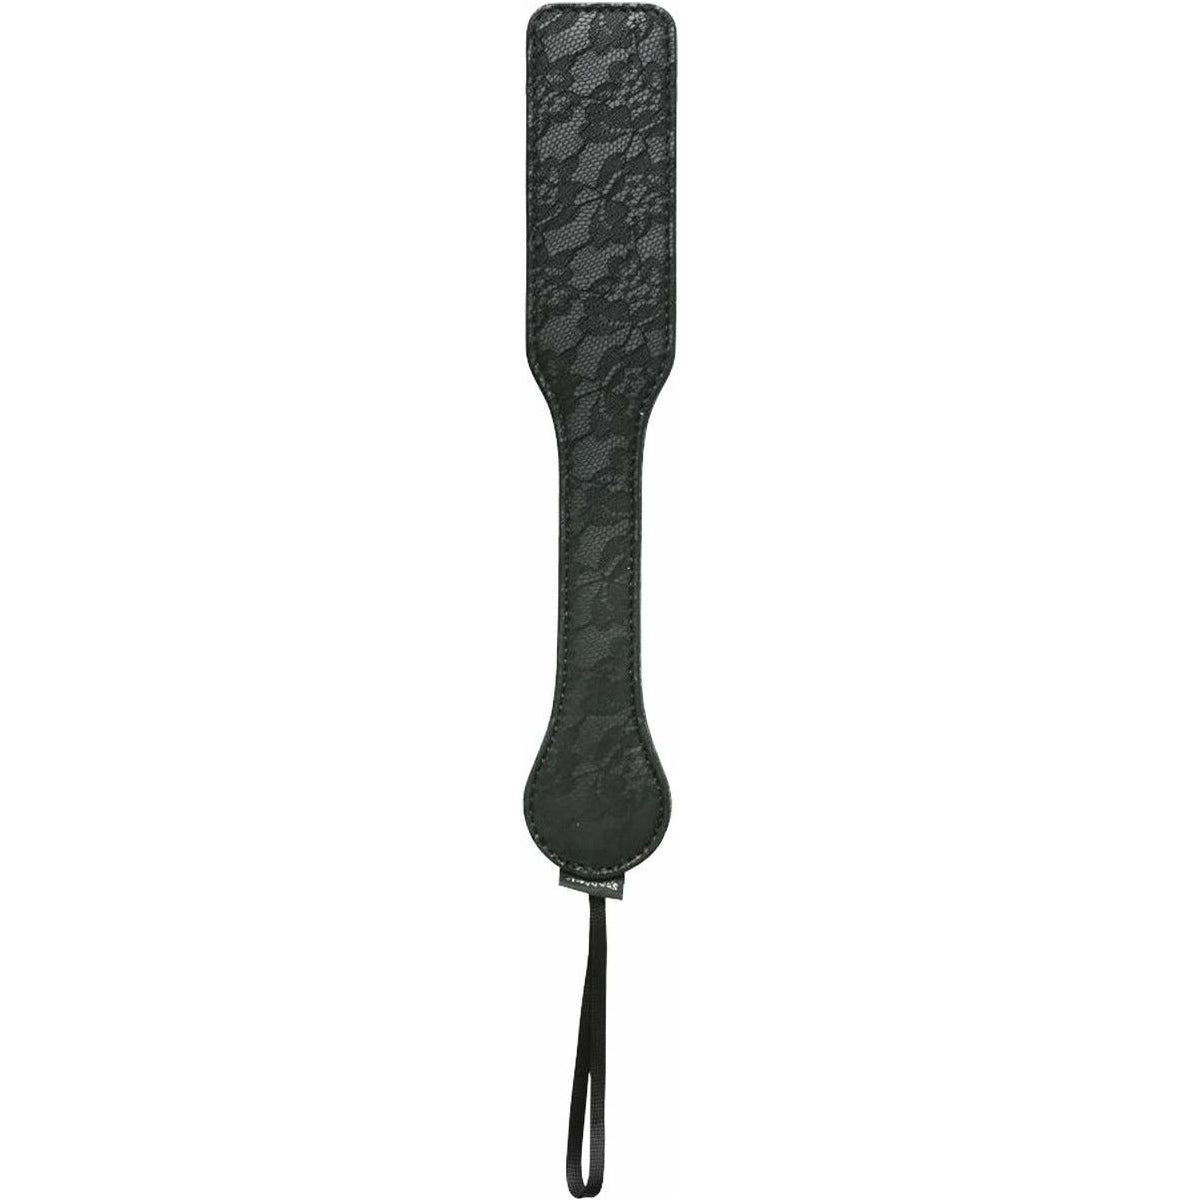 Sportsheets Sincerely - Lace Paddle - Black